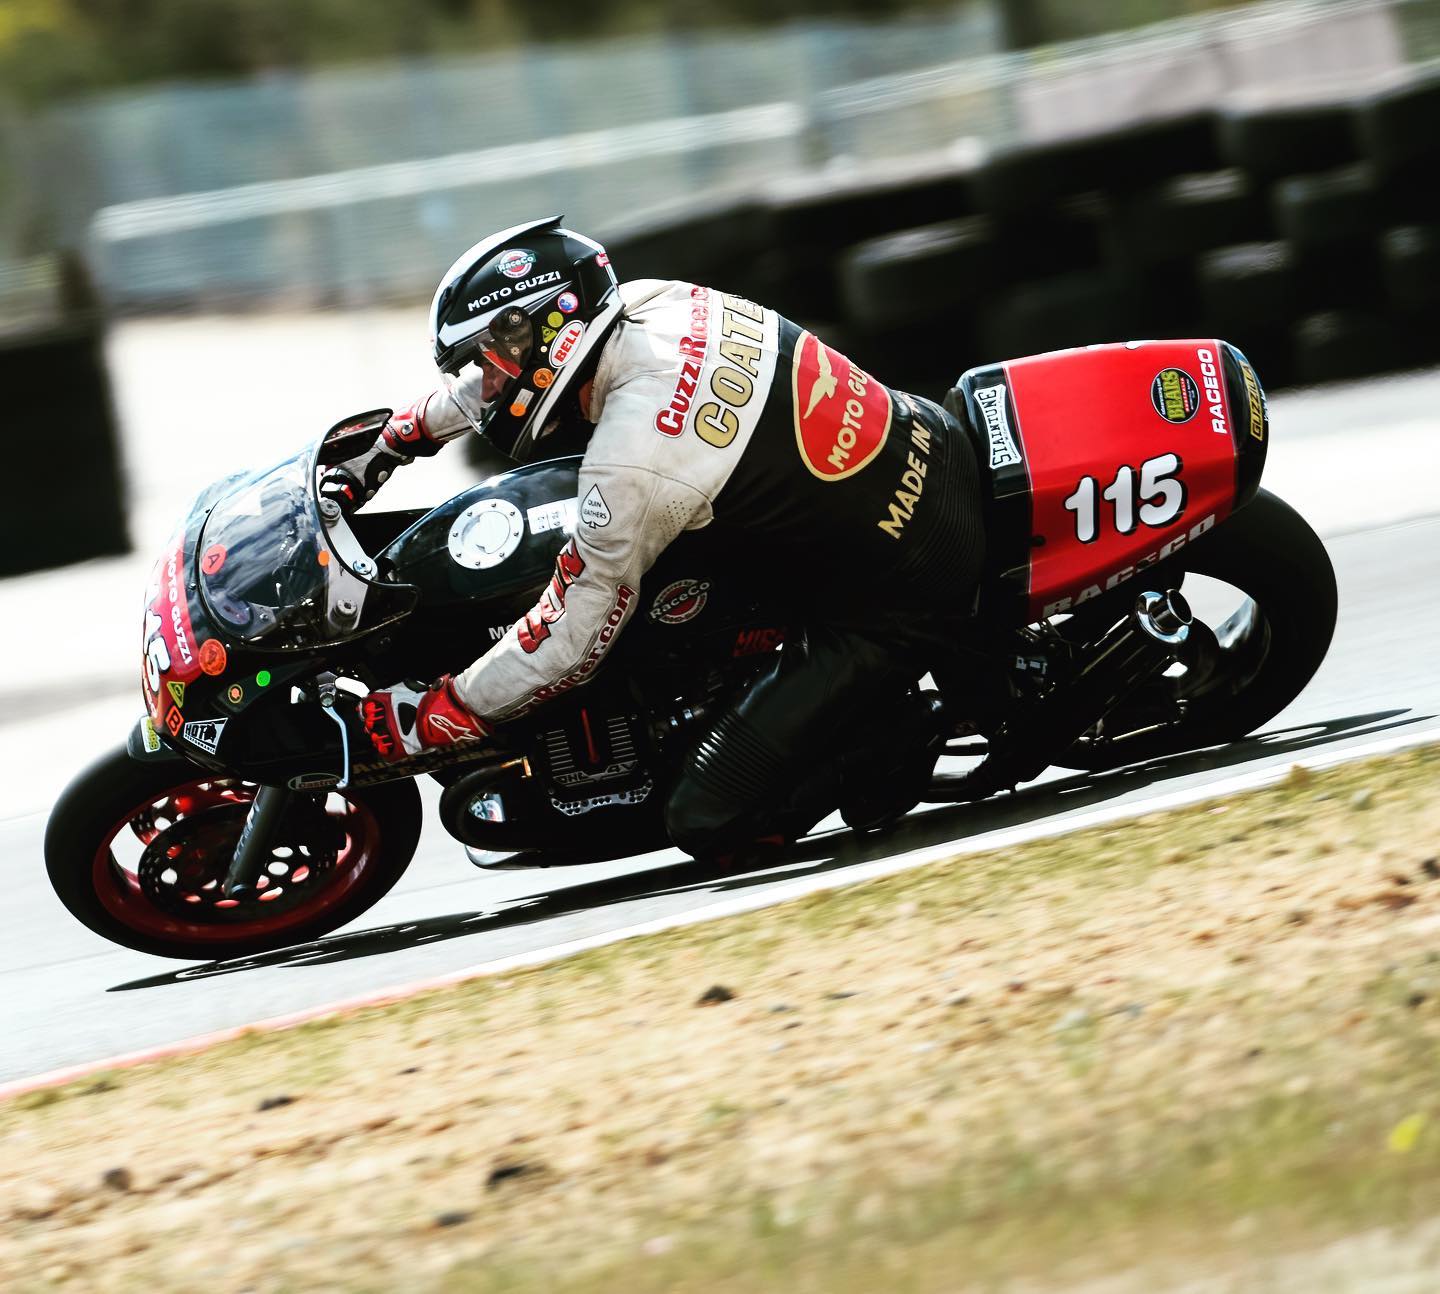 RaceCo Daytona 1288 at the Australian Historic Road Racing Championships at Collie Western Australia. Placed 5th in P6 1300. Ammo’s beast still alive and kicking.